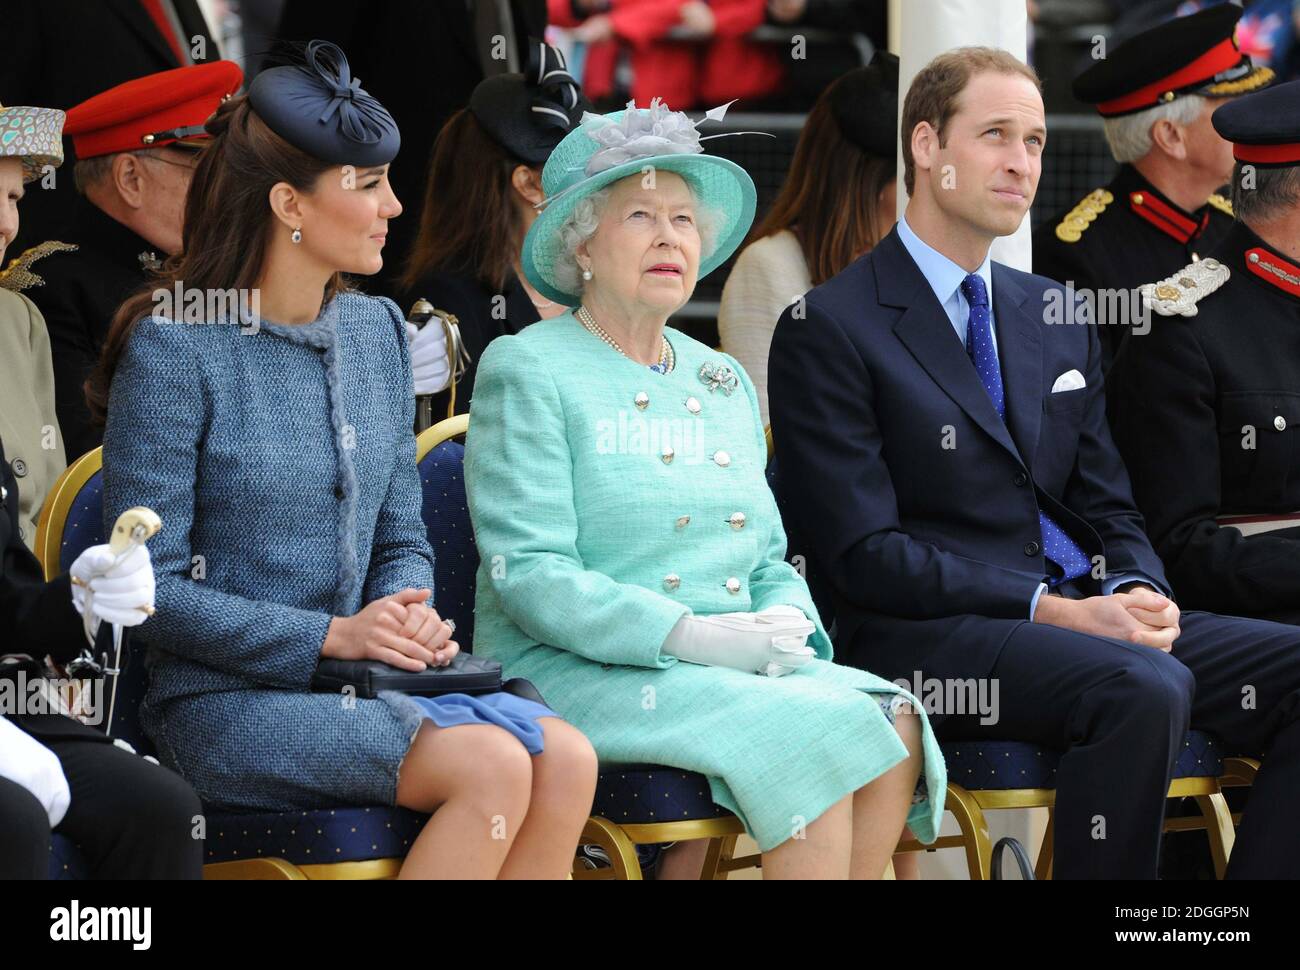 The Duchess of Cambridge, Queen Elizabeth II and Prince William, The Duke of Cambridge watch a children's sports event during a visit to Vernon Park in Nottingham. Stock Photo